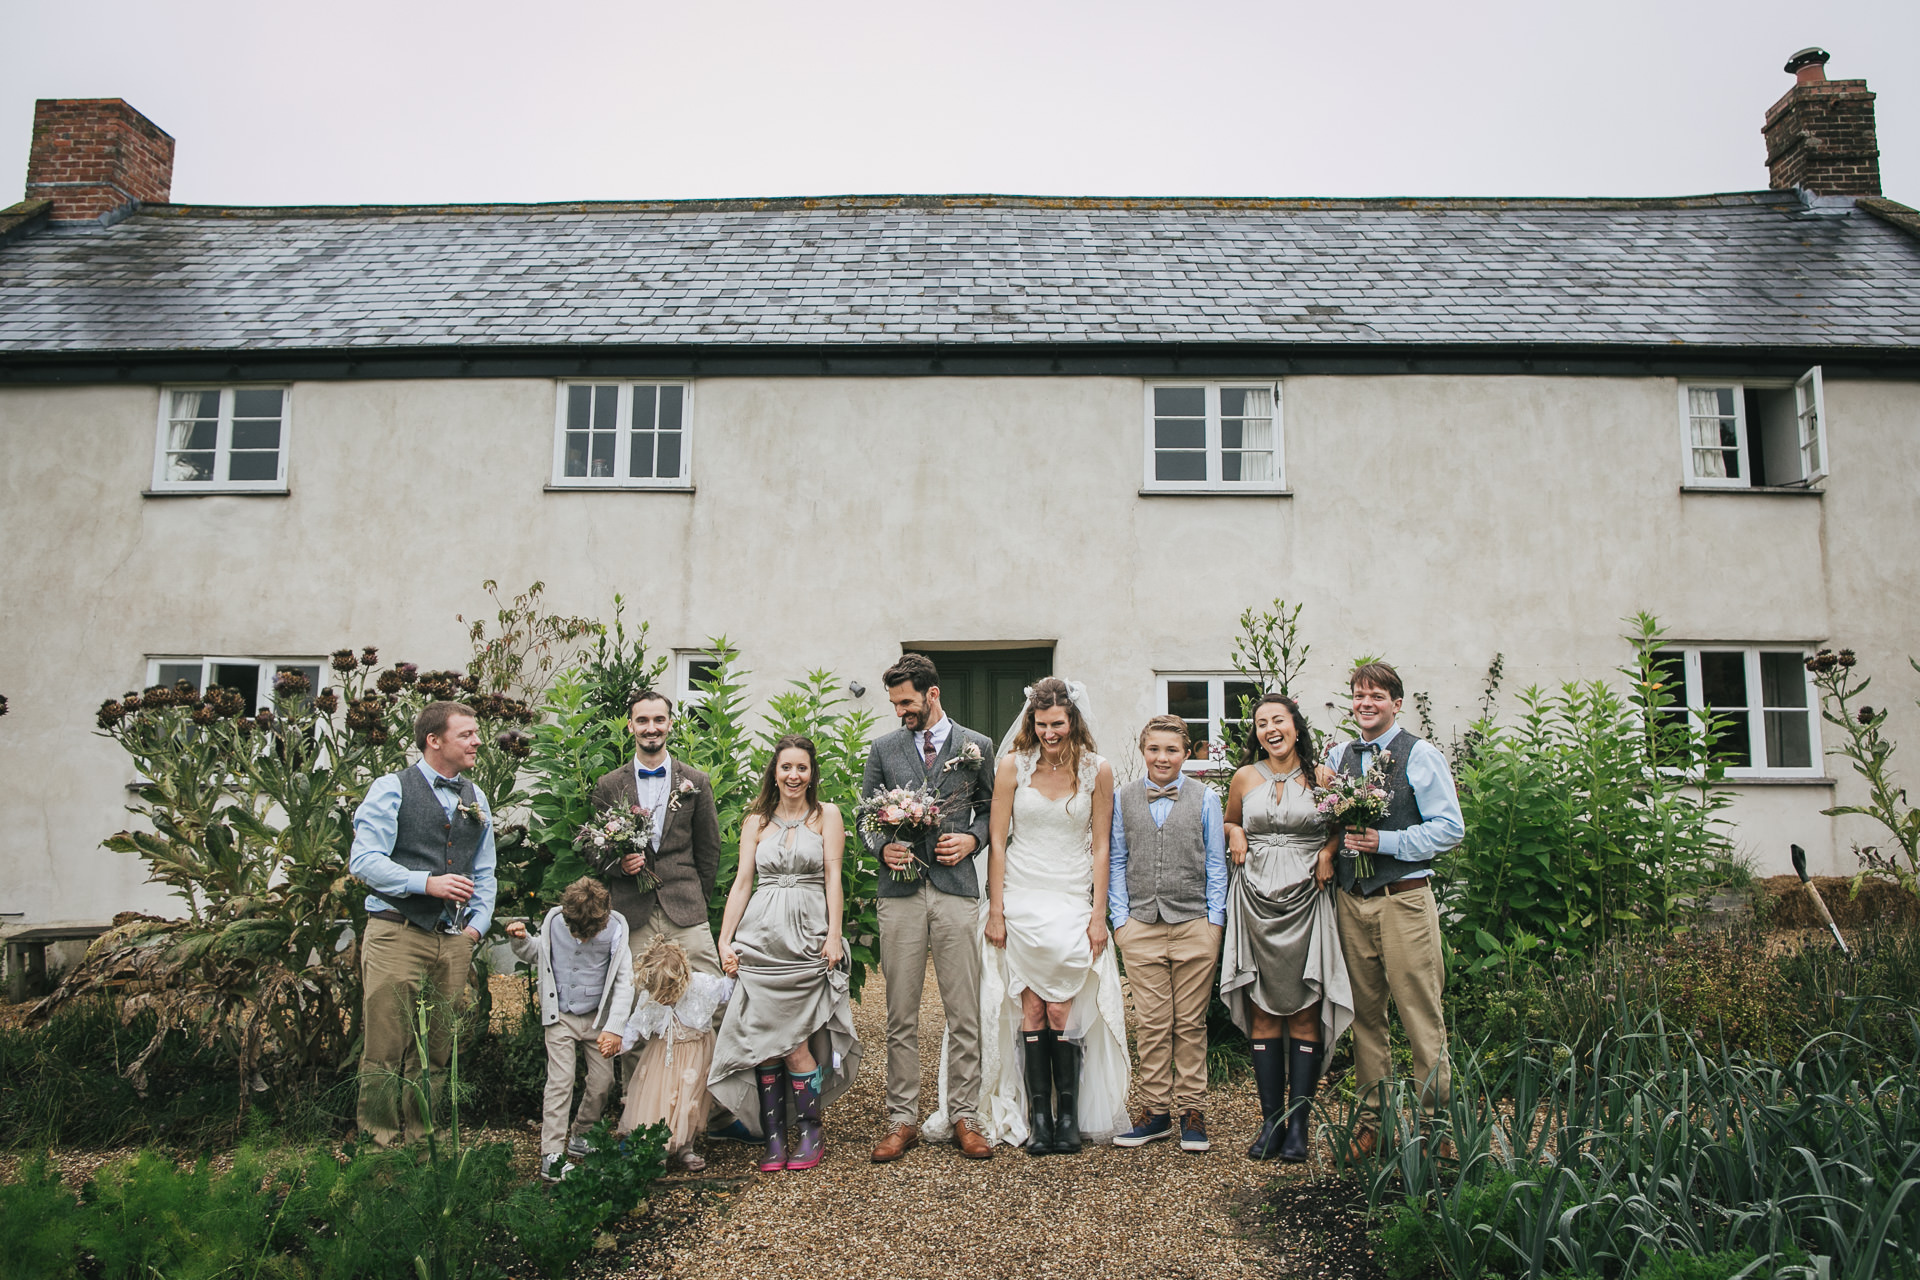 A group photo with the bride and groom with their wedding party all wearing wellies and laughing. 